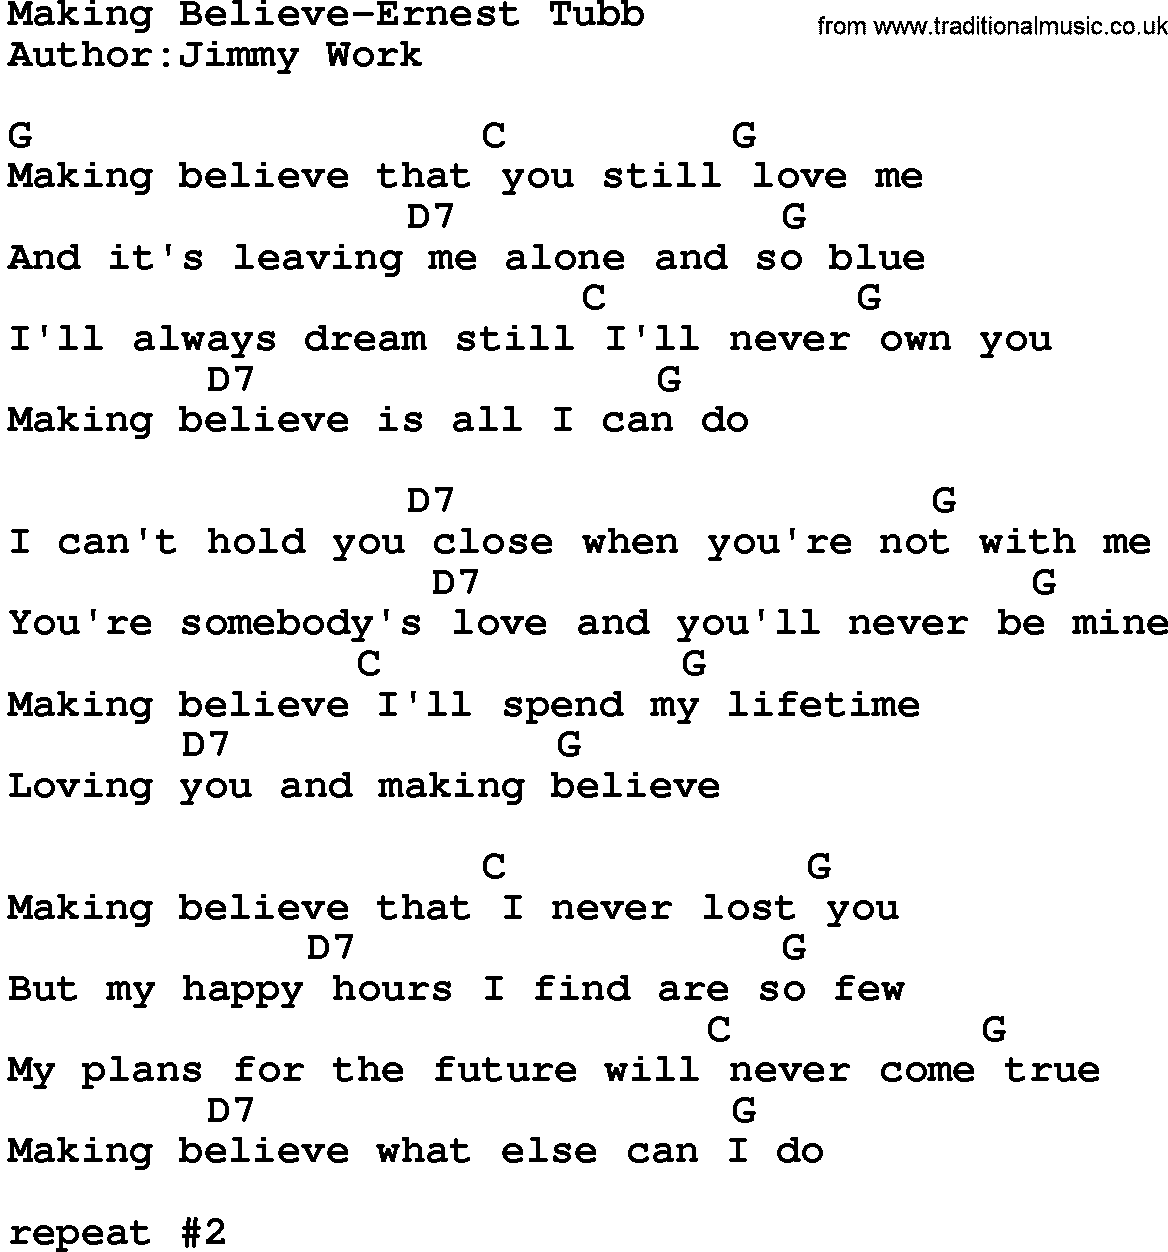 Country music song: Making Believe-Ernest Tubb lyrics and chords